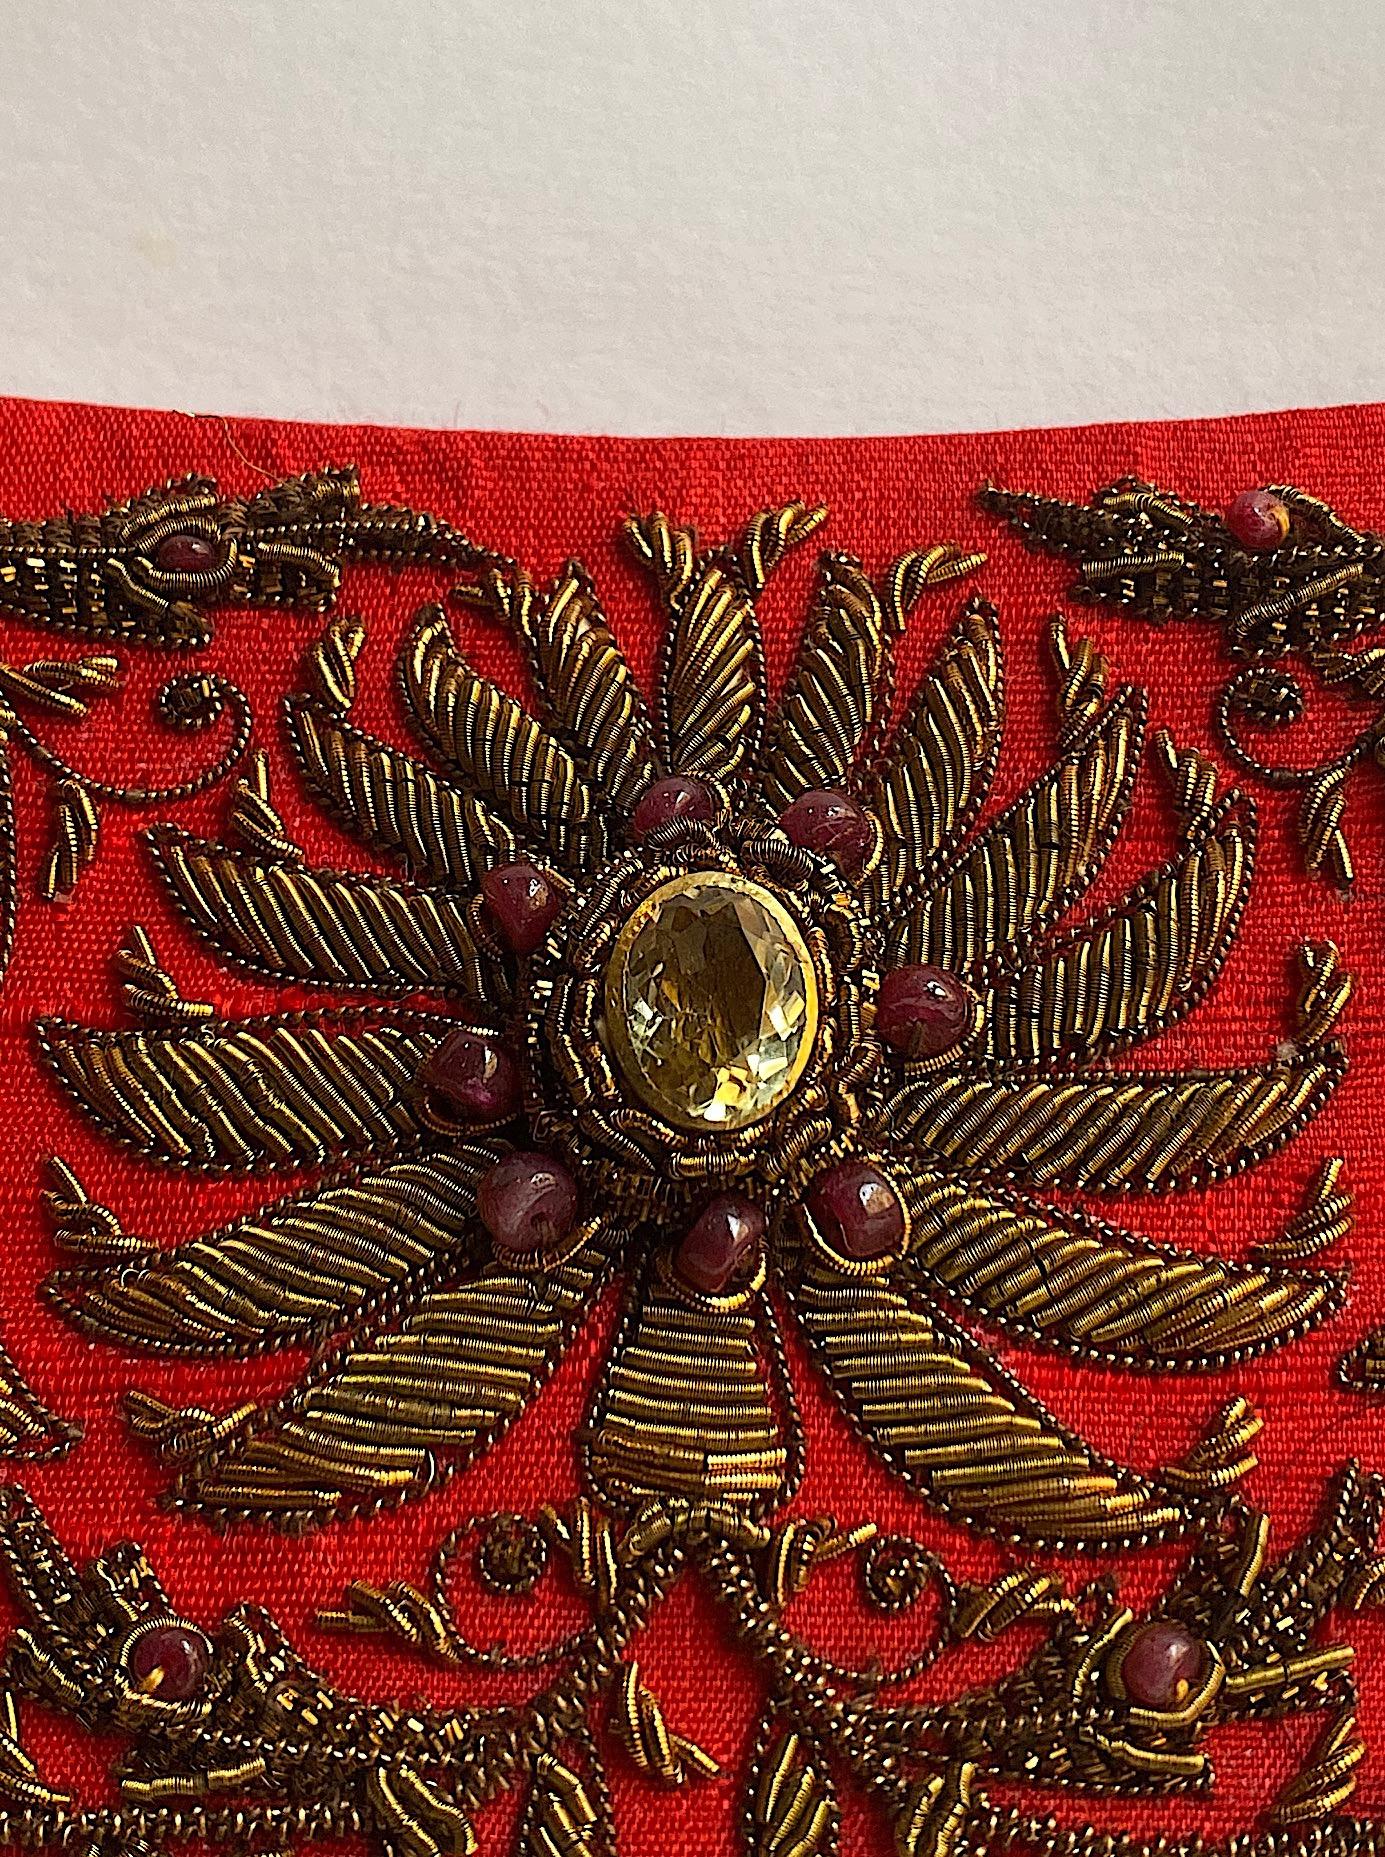 A beautiful and intricate hand embroidered evening bag from India. The use of gold and silver thread and precious jewels in embroidery is known as Zardozi and was once used to embellish the attire of the Kings and the royals in India. Red silk